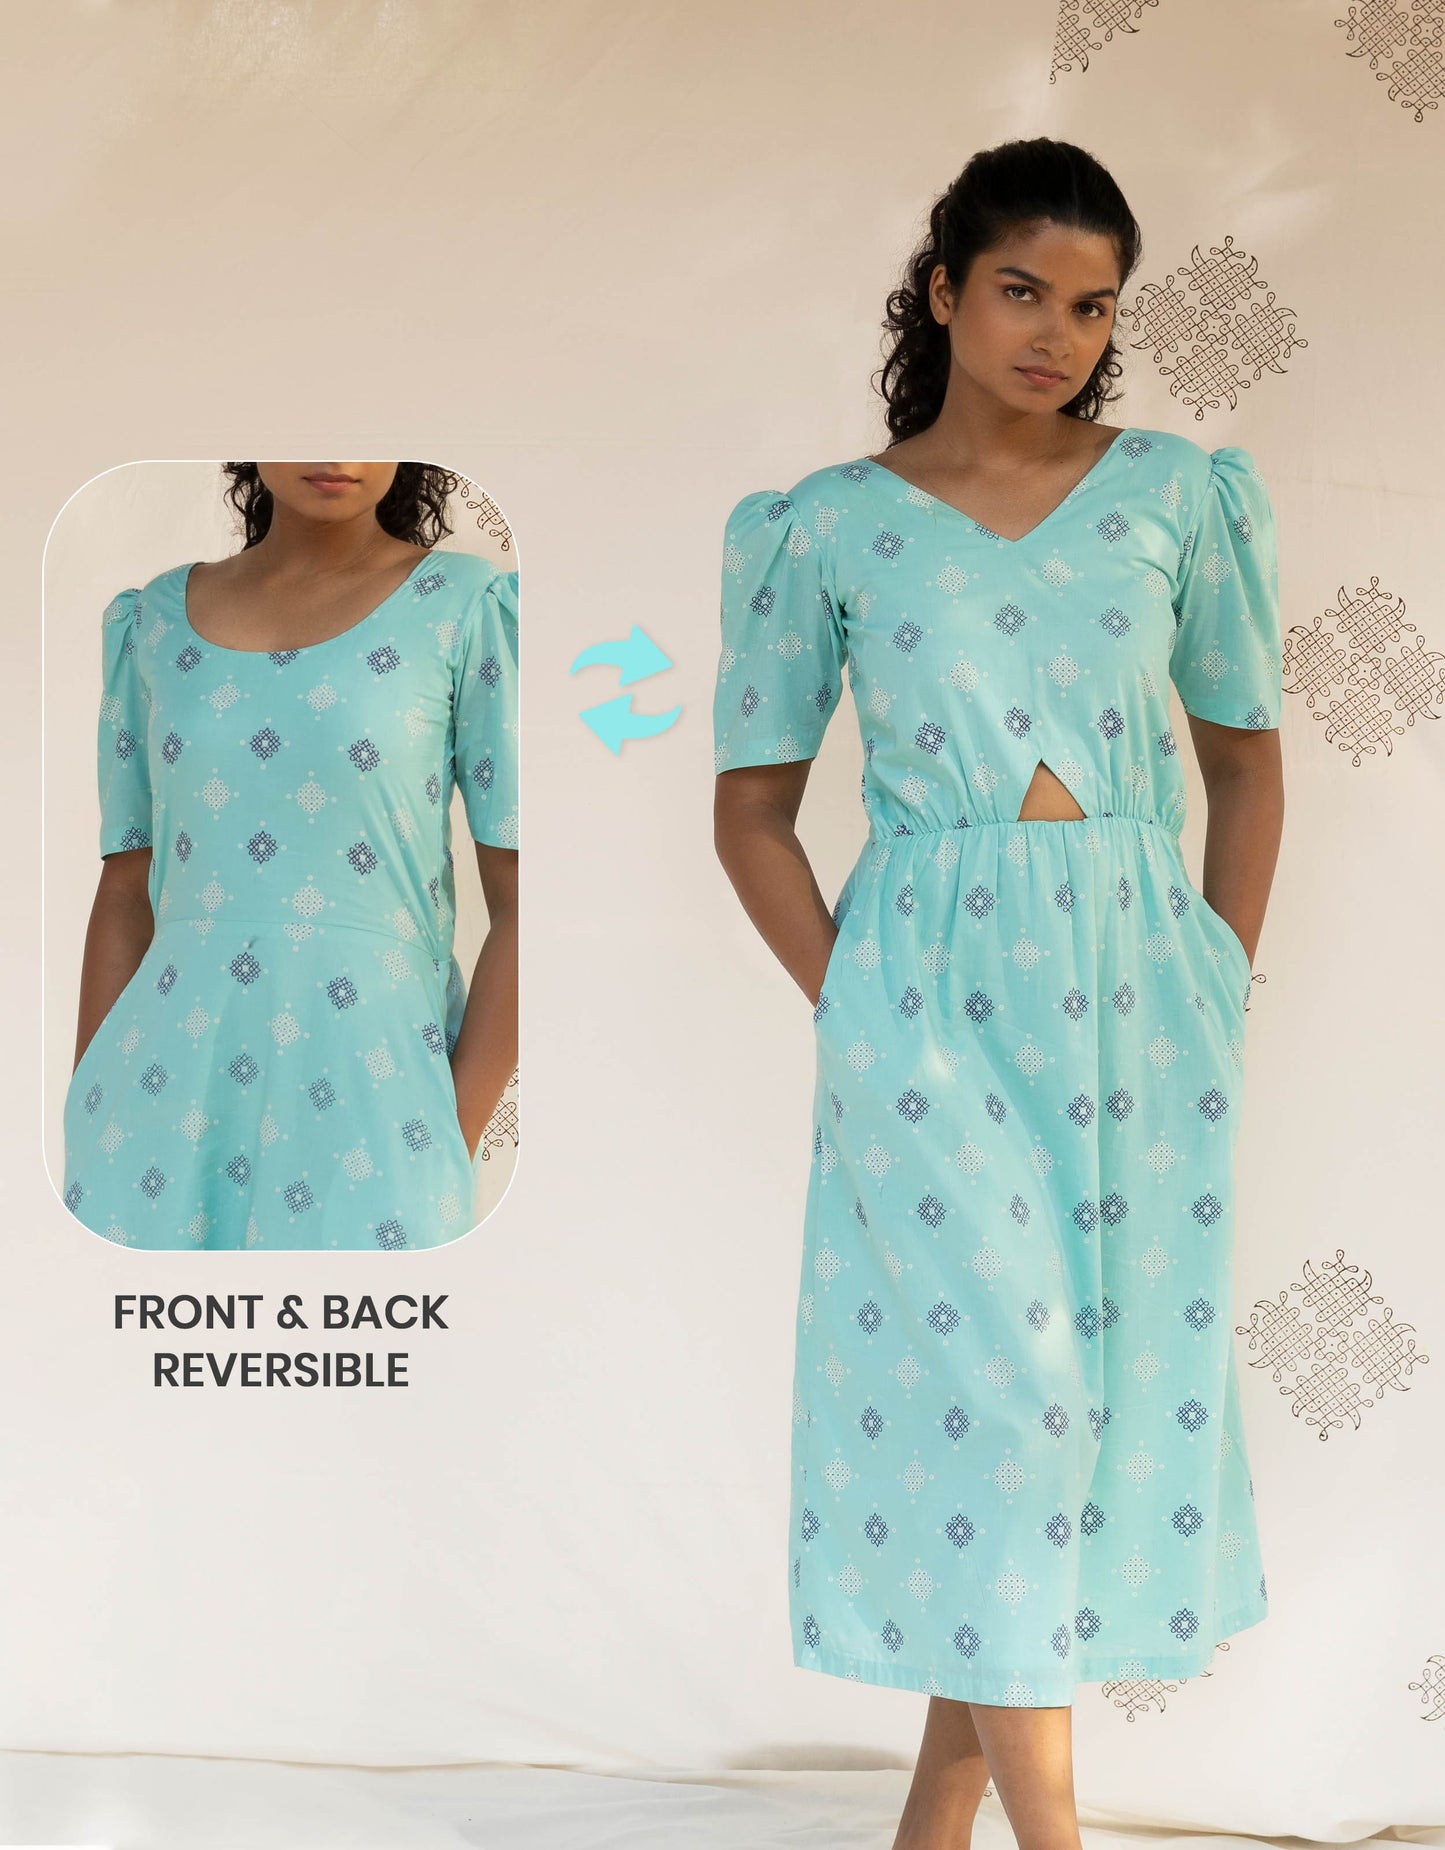 Hueloom Mint Blue Reversible Cut-out Dress front view with cut showing a versatile front and back reversible outfit option